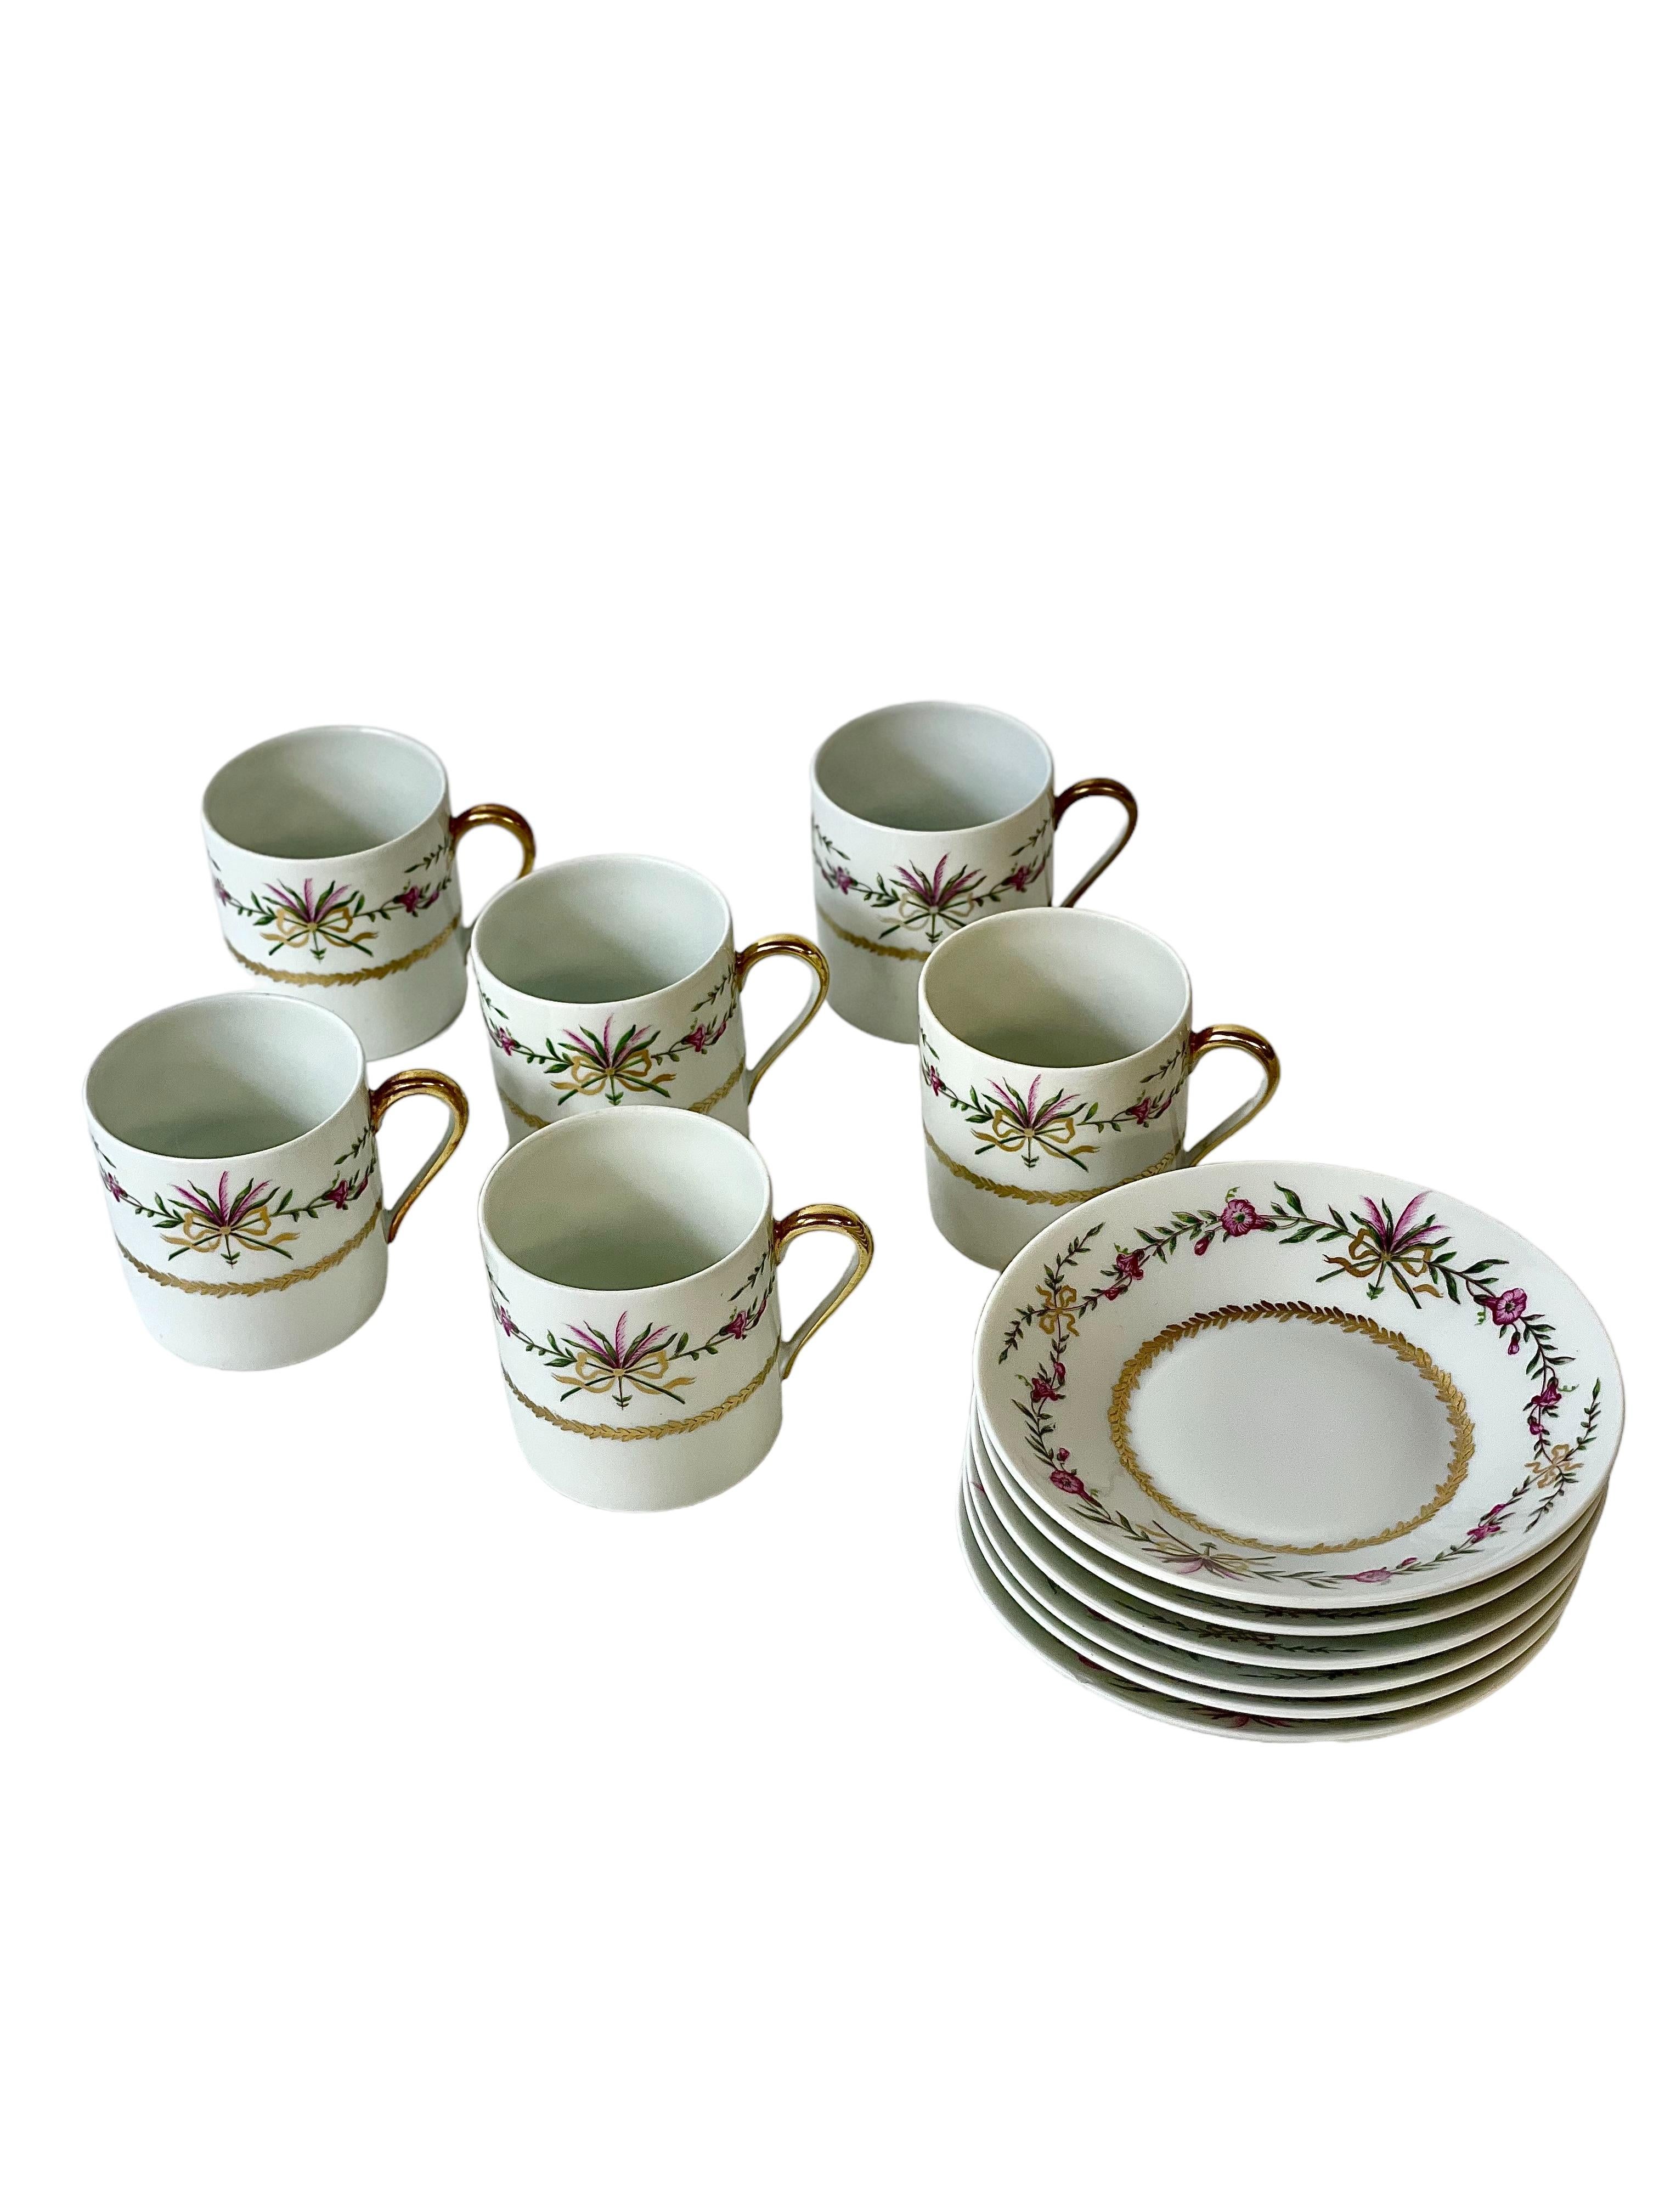 Louis XVI Dinner Service of 65 Pieces in Limoges Porcelain, by Raynaud